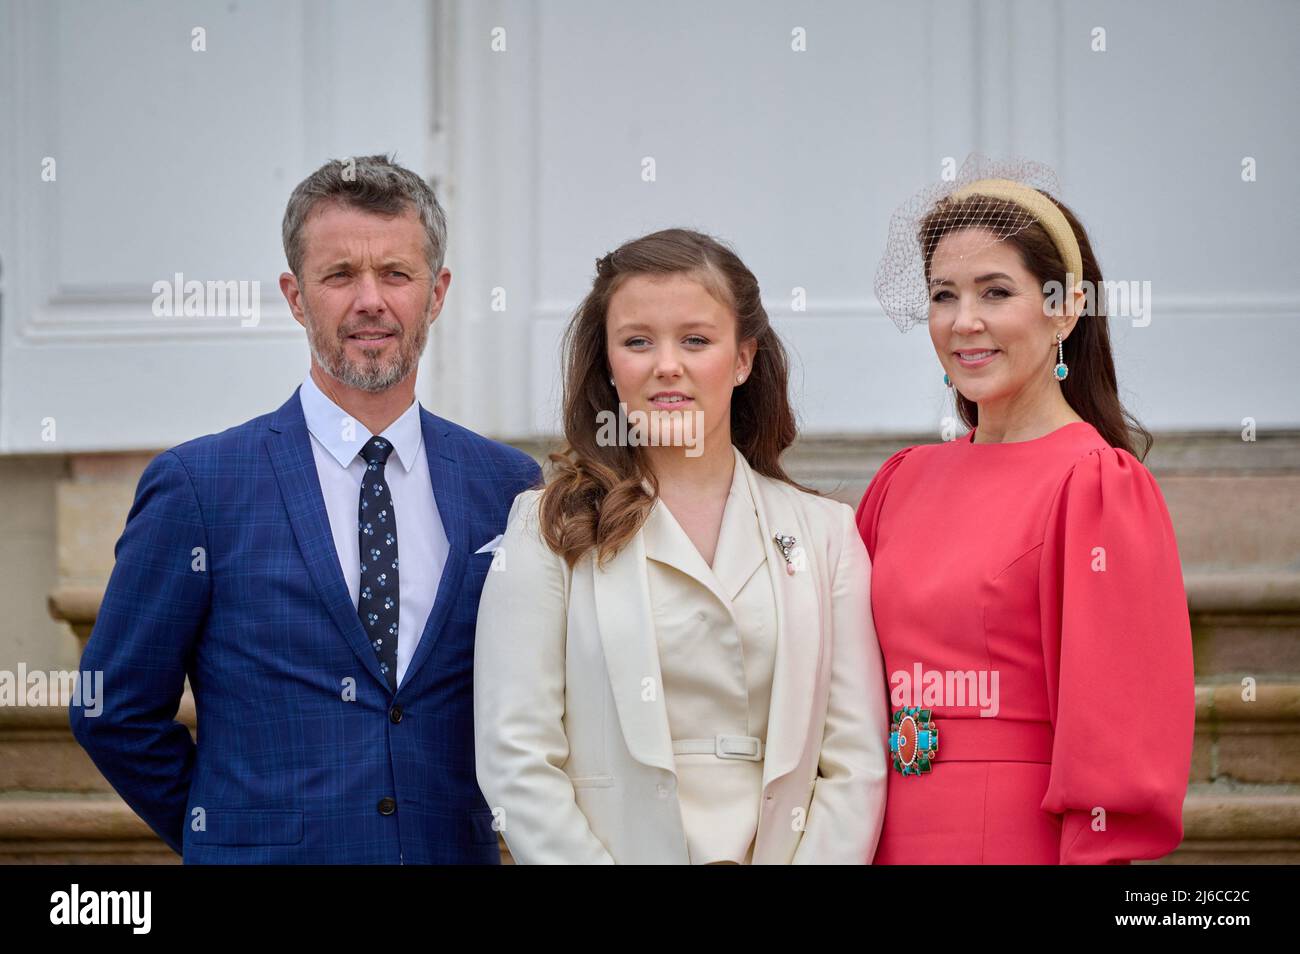 Princess Isabella of Denmark is confirmed . The confirmation will take place in Fredensborg Castle Church by the Royal Confessor, Bishop Henrik Wigh-Poulsen. PICTURE:Princess Isabella with mother and father,Crownprince Frederik and Crownprincess Mary of Denmark. Fredensborg, Denmark, on April 30, 2022. Photo by Stefan Lindblom/Stella Pictures/ABACAPRESS.COM Stock Photo